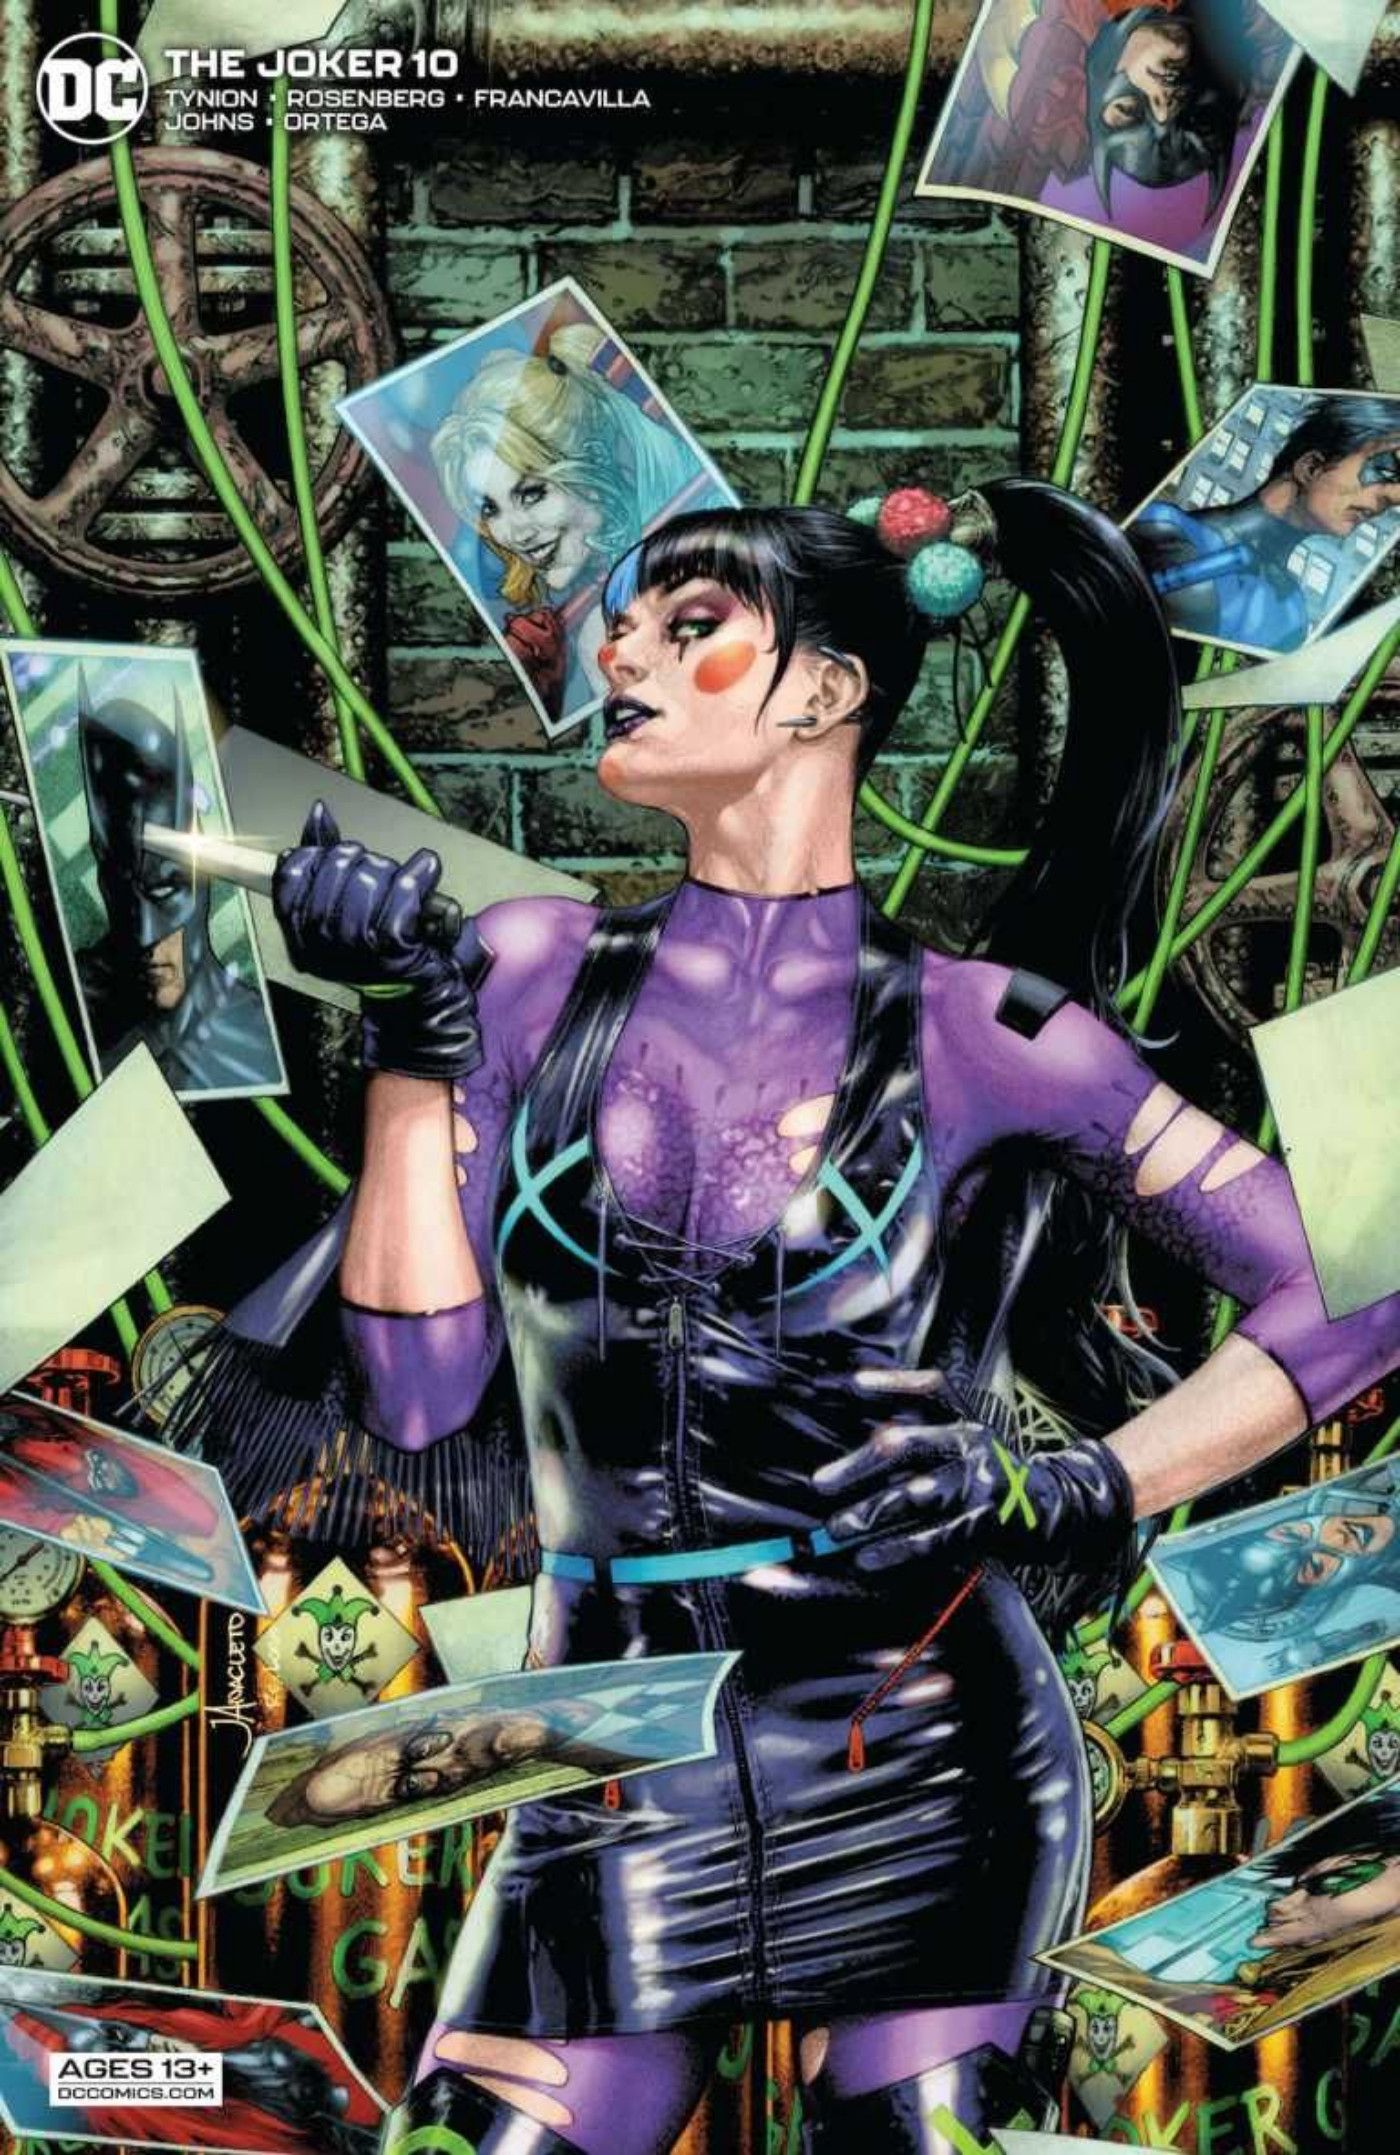 Joker 10 cover, featuring Punchline